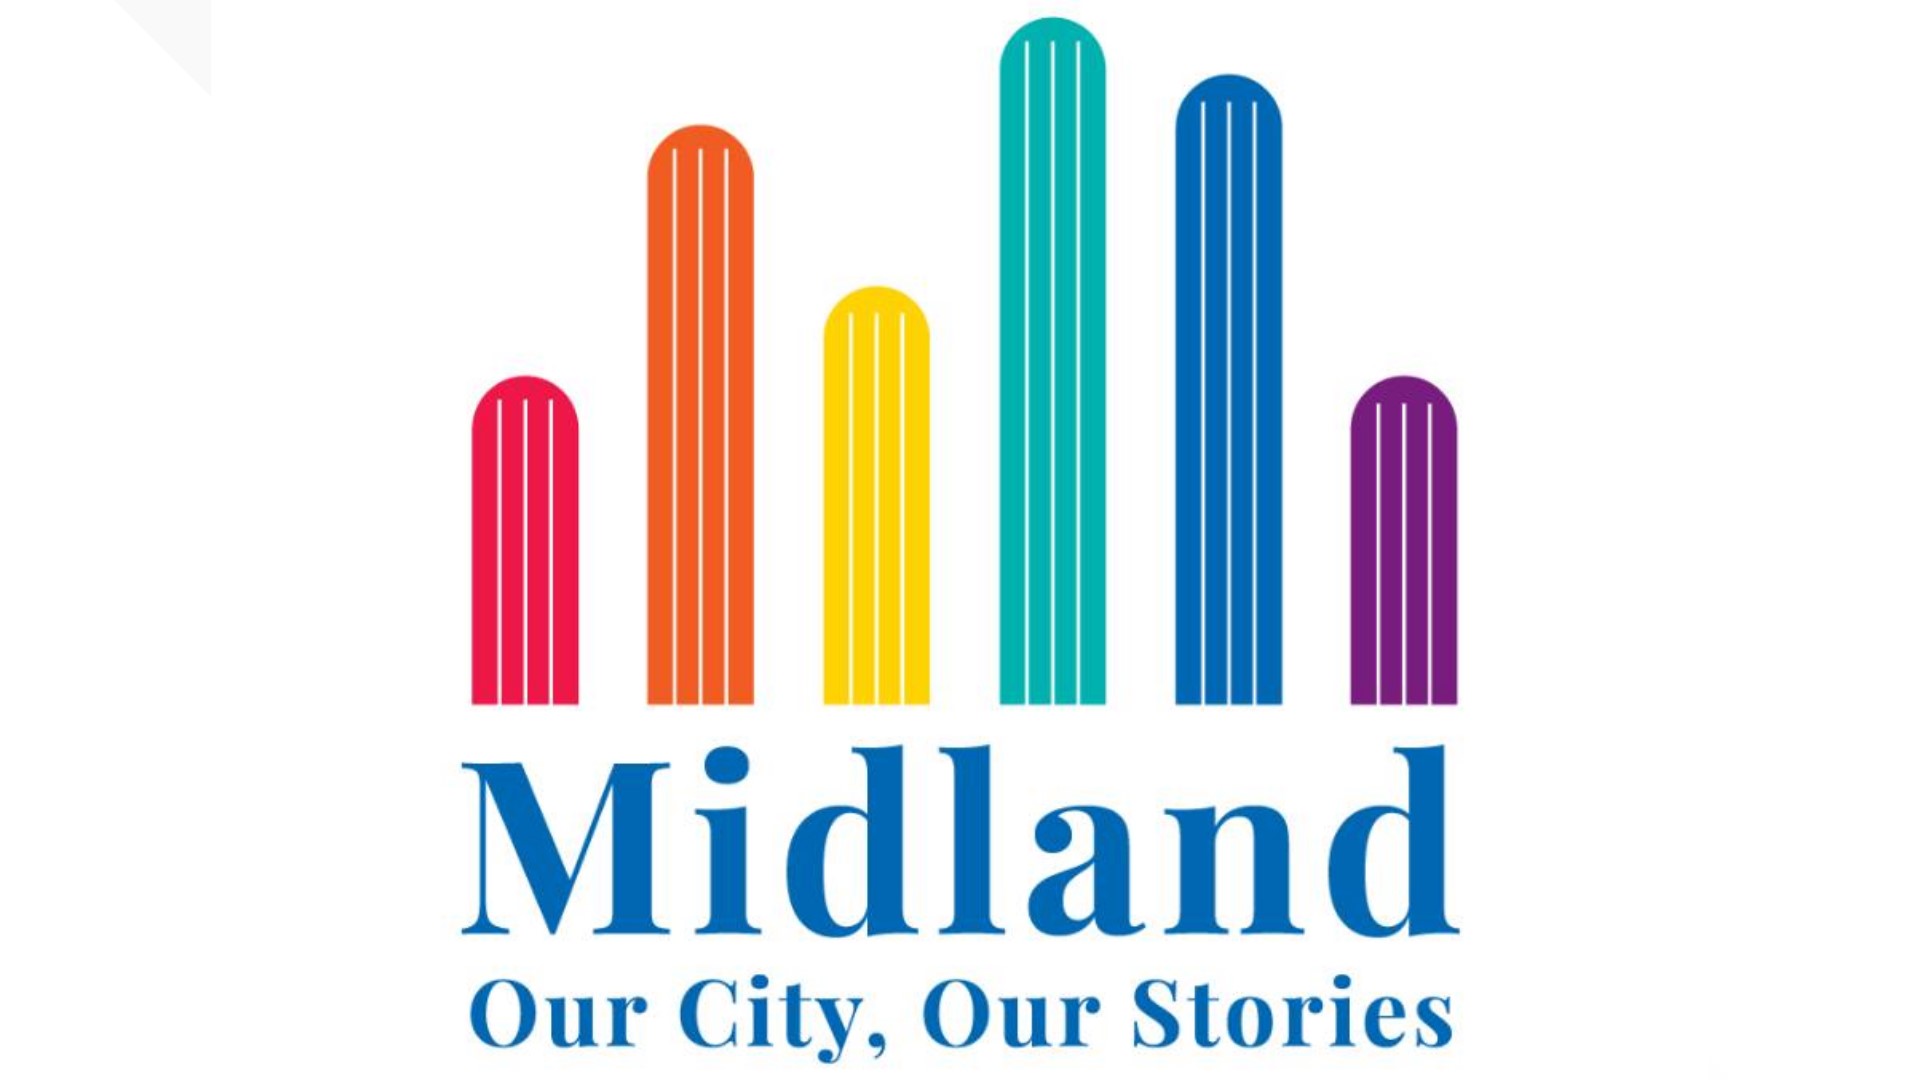 "Midland: Our City, Our Stories" premieres Sept. 8 at 7 p.m.